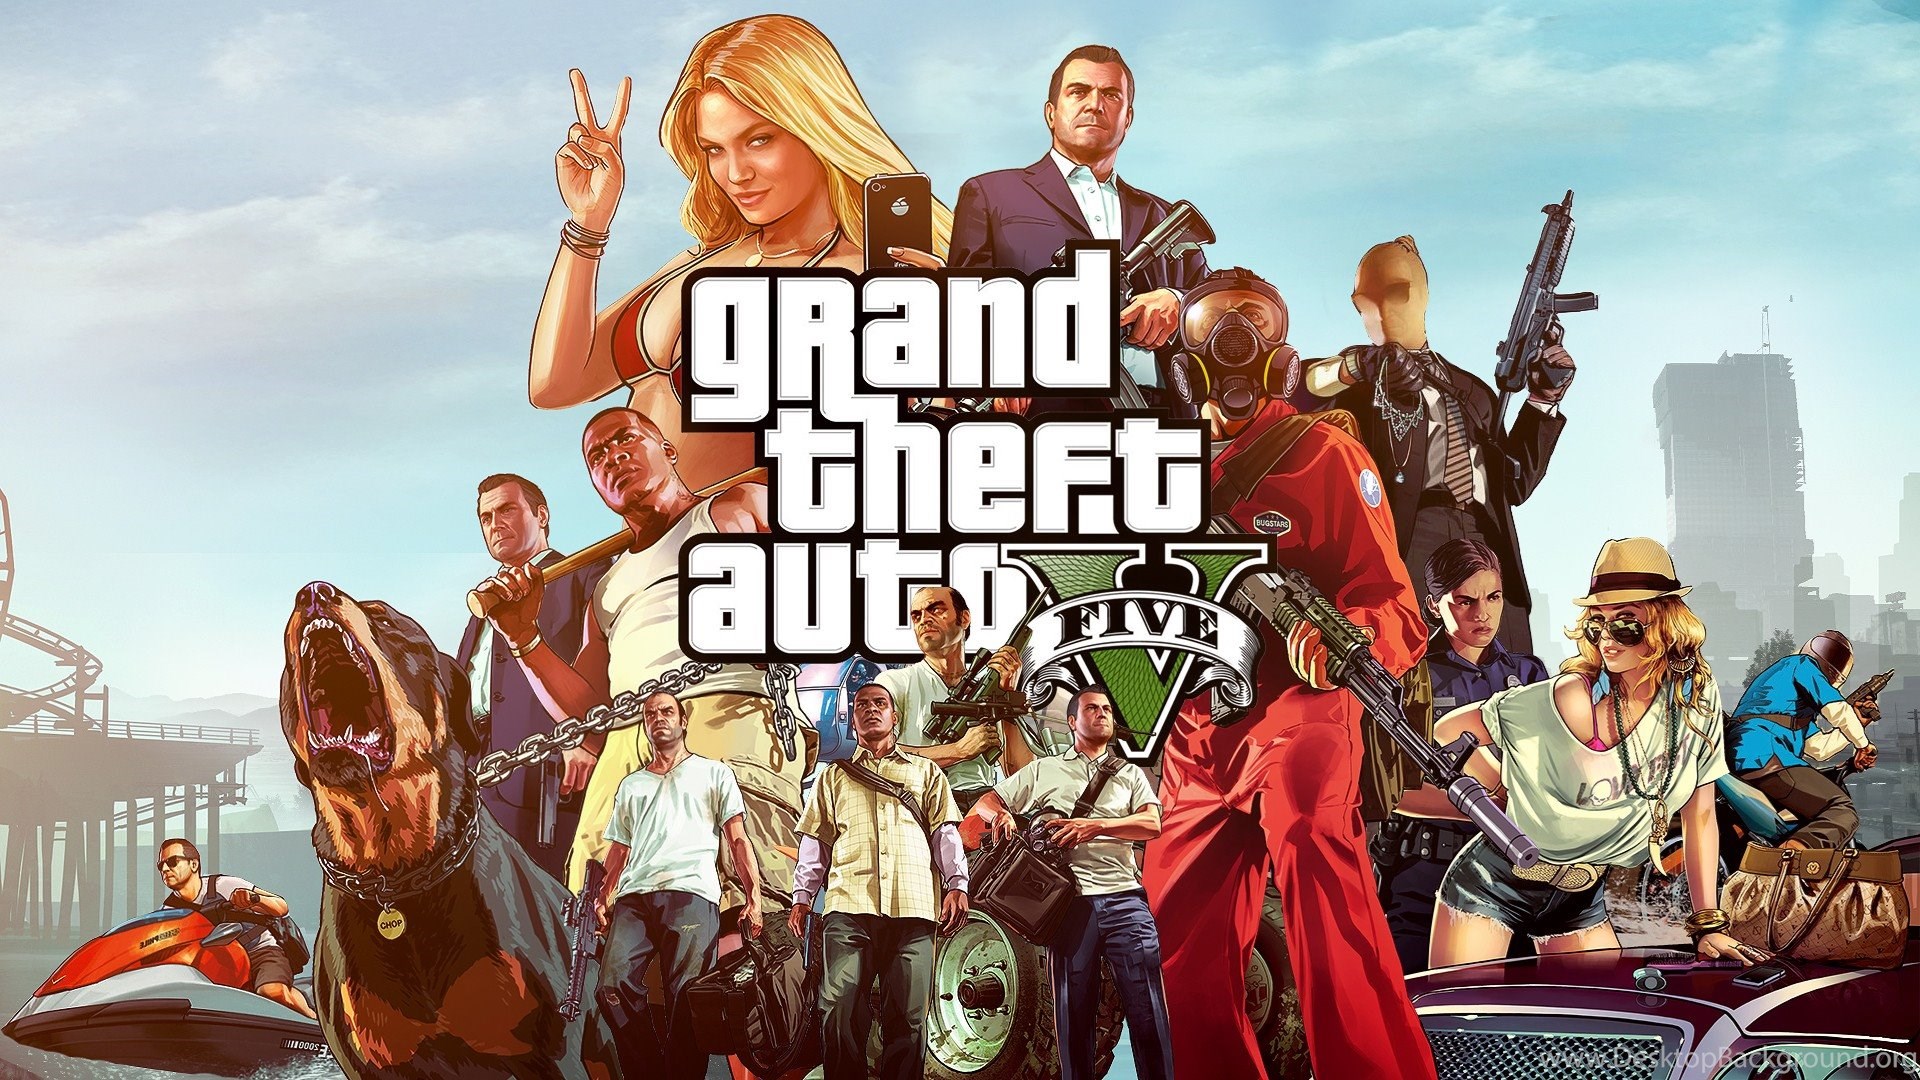 gta v wallpaper,movie,games,pc game,adventure game,strategy video game